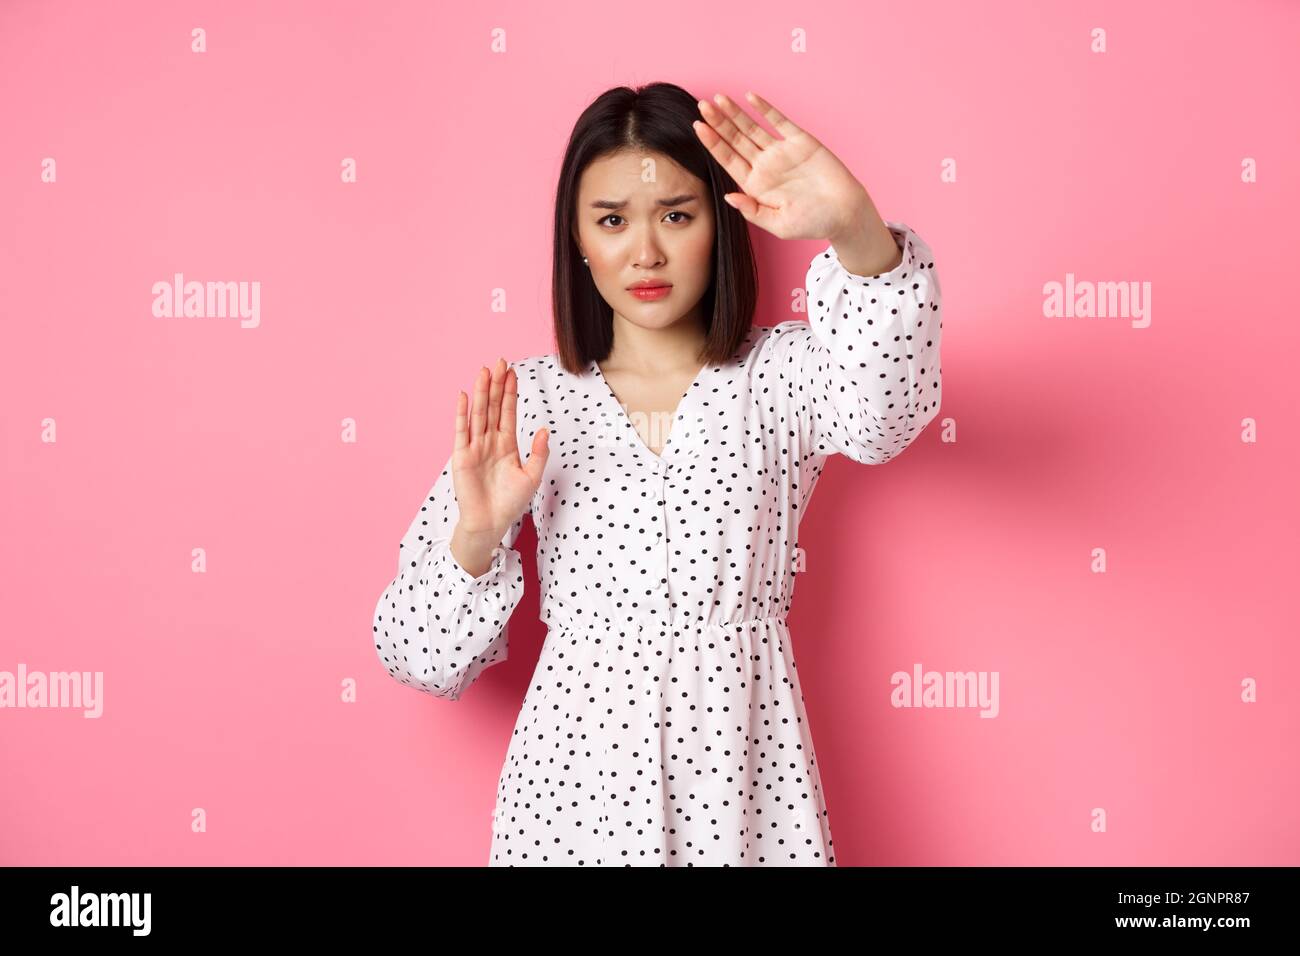 Timid and scared asian woman defending herself, raising arms in protection, victim being attacked, standing over pink background. Stock Photo